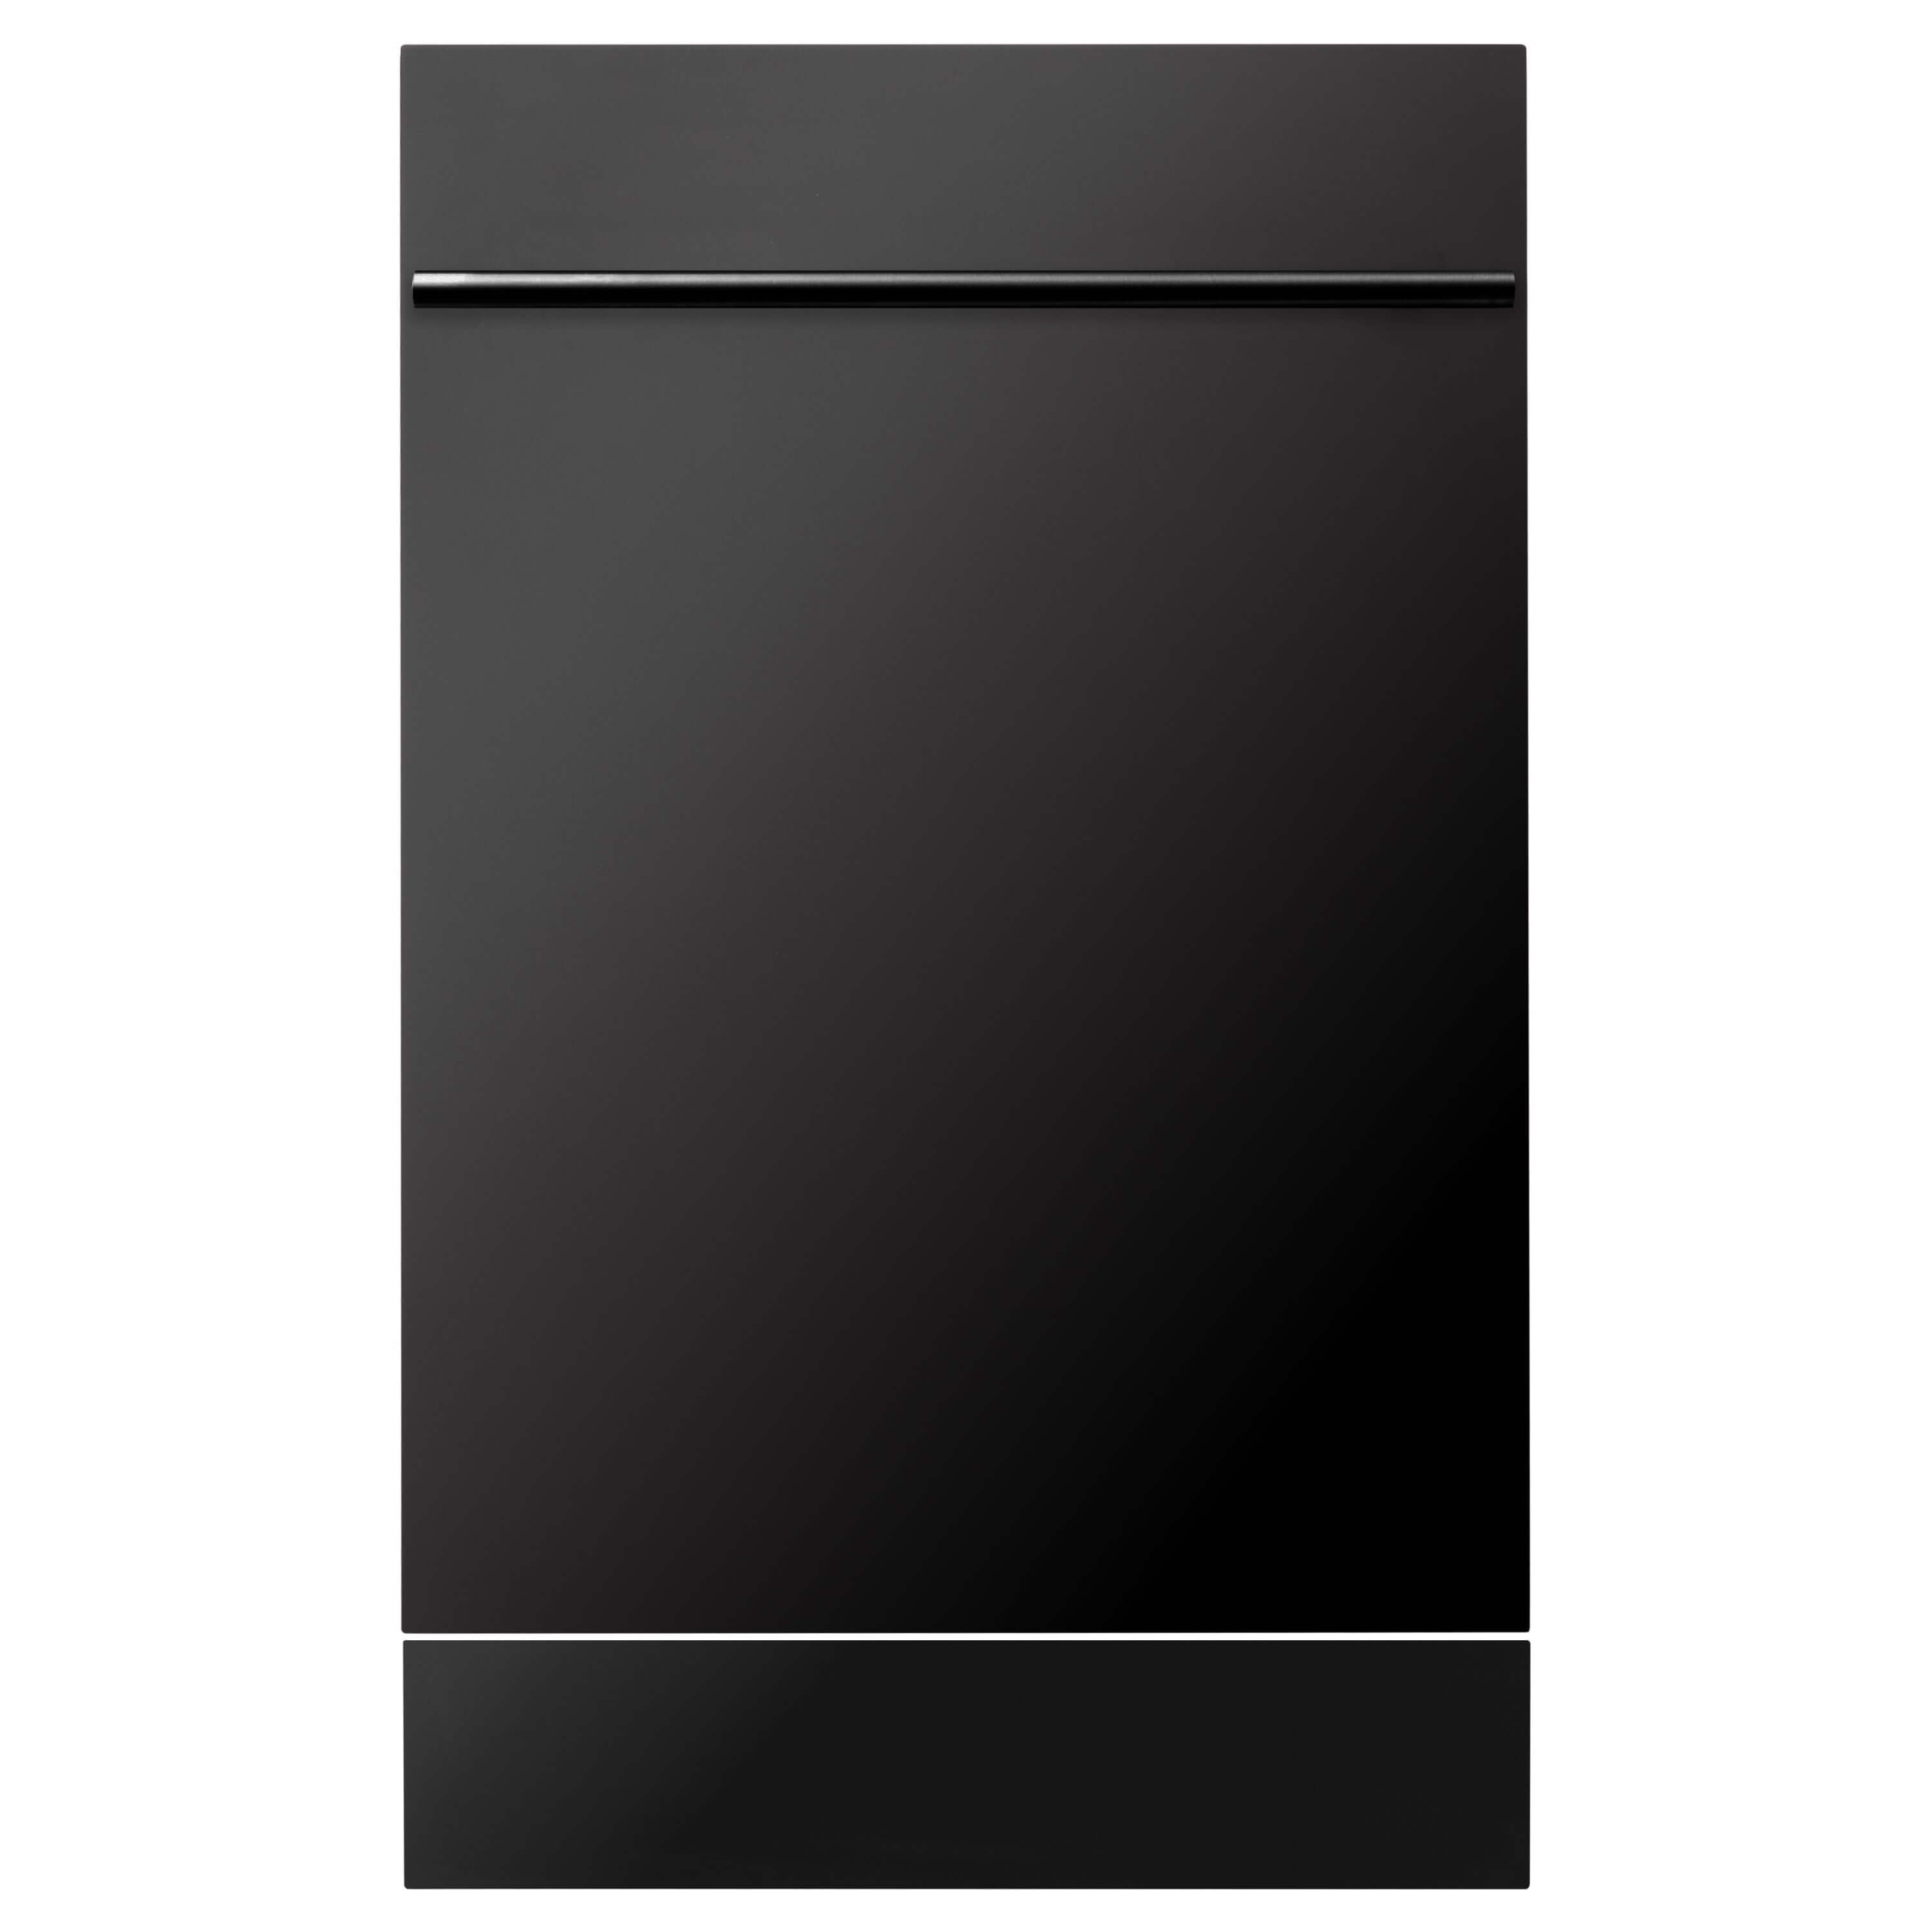 ZLINE 18 in. Compact Black Stainless Steel Top Control Built-In Dishwasher with Stainless Steel Tub and Modern Style Handle, 52dBa (DW-BS-H-18) front, closed.